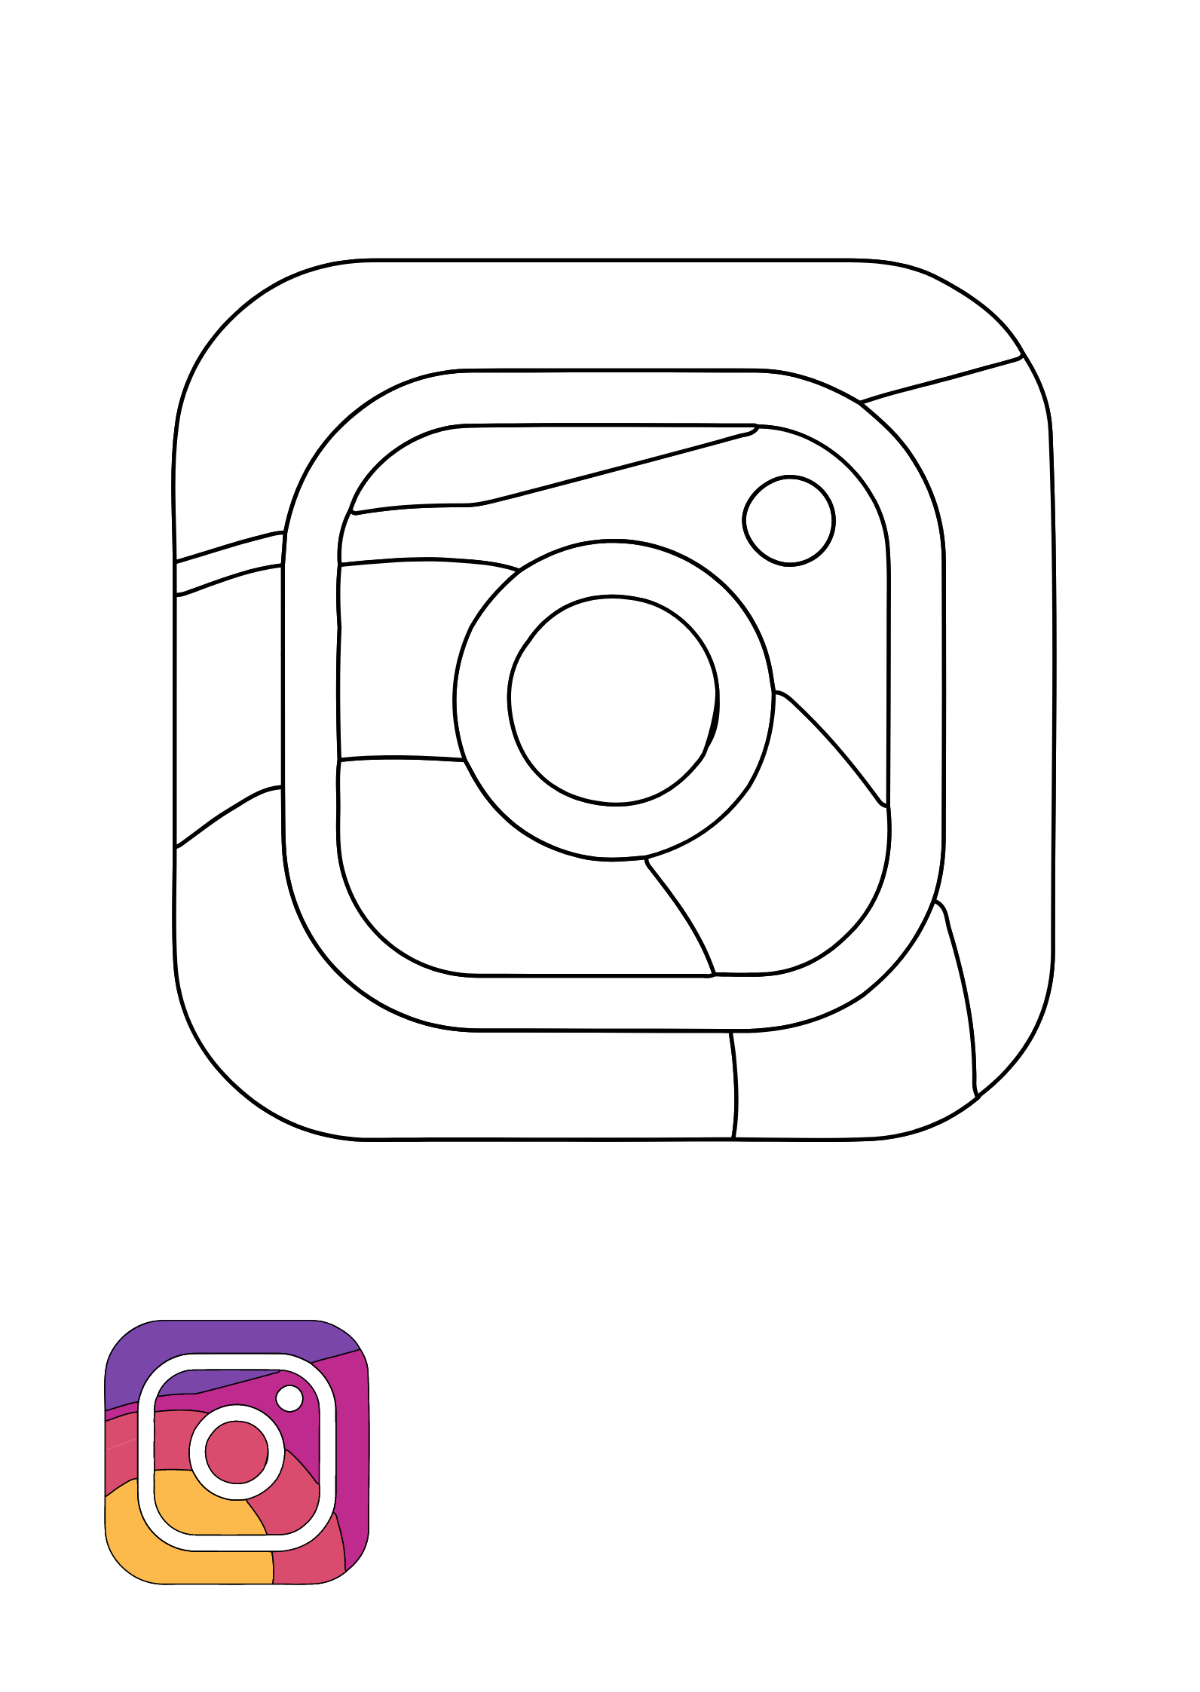 Instagram Colour Logo Coloring Page Template